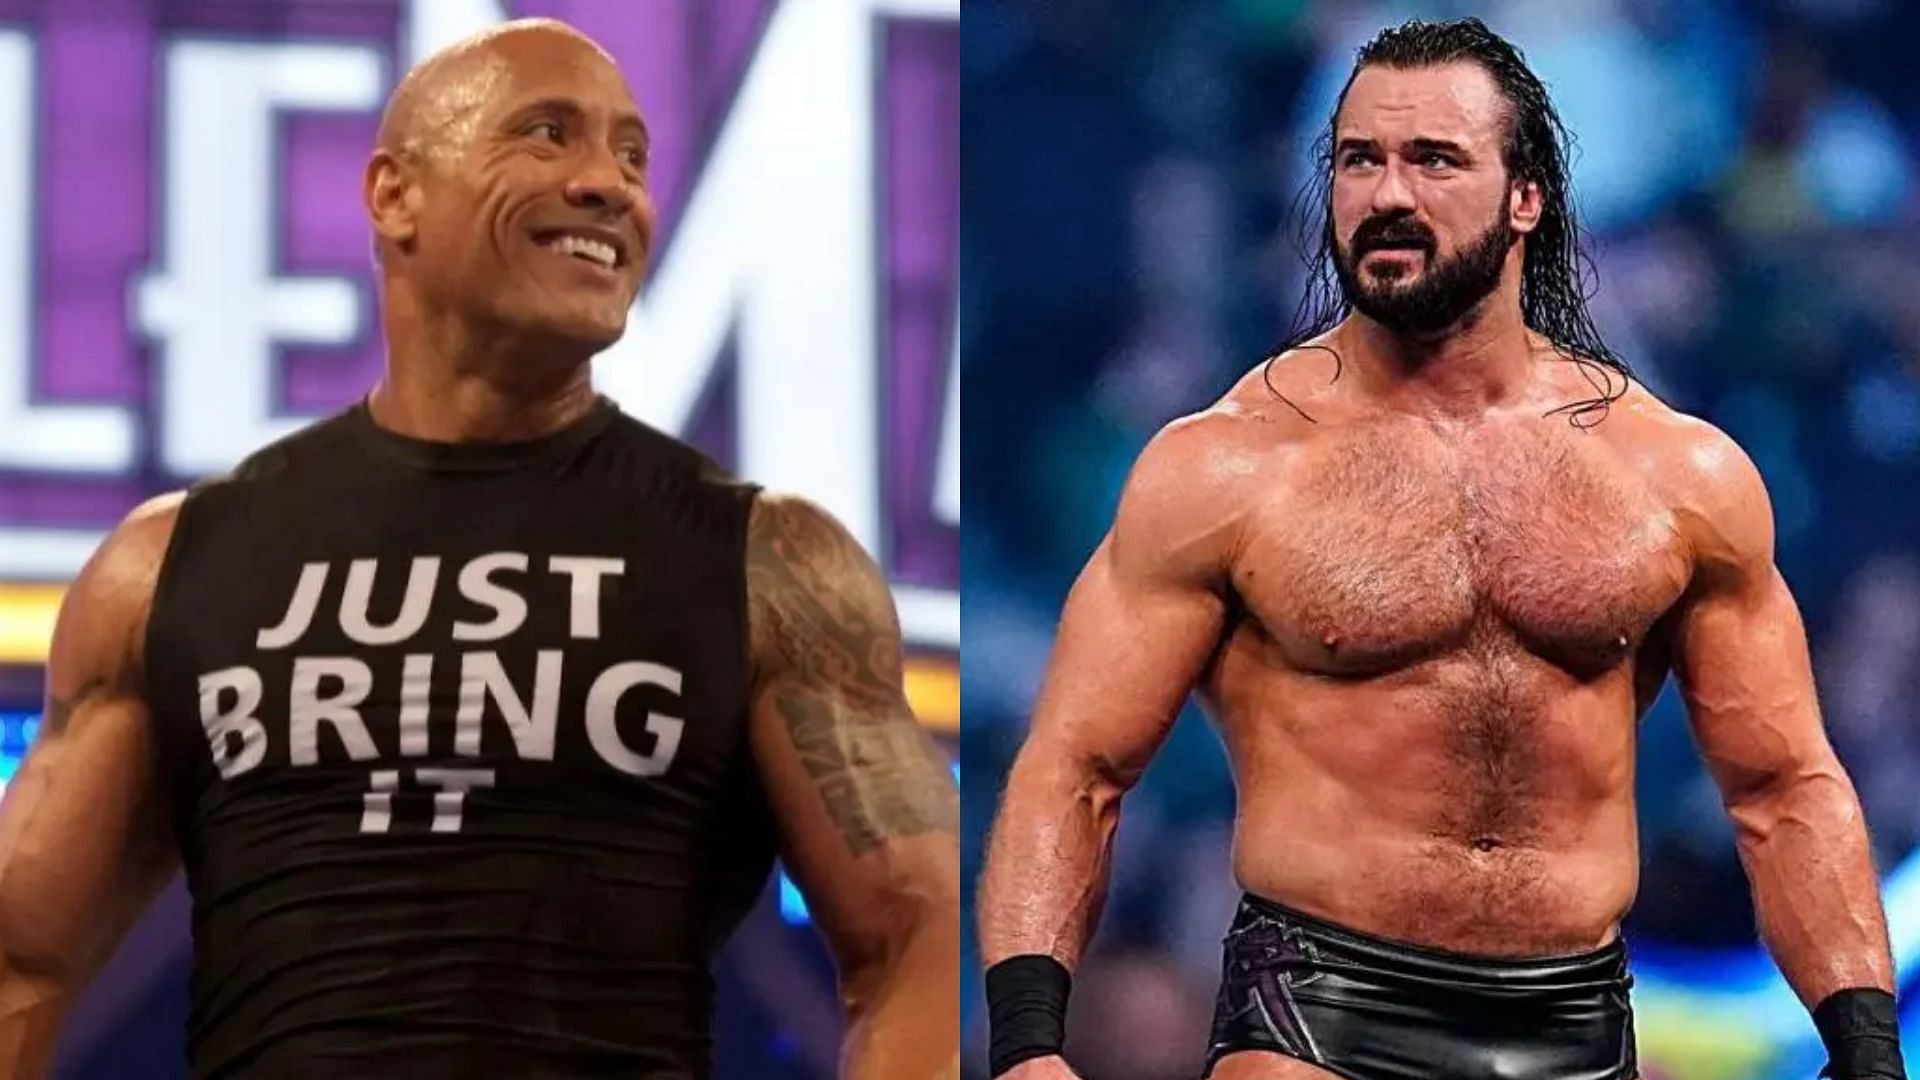 The Rock and Drew McIntyre were among the rumors in November 2021.